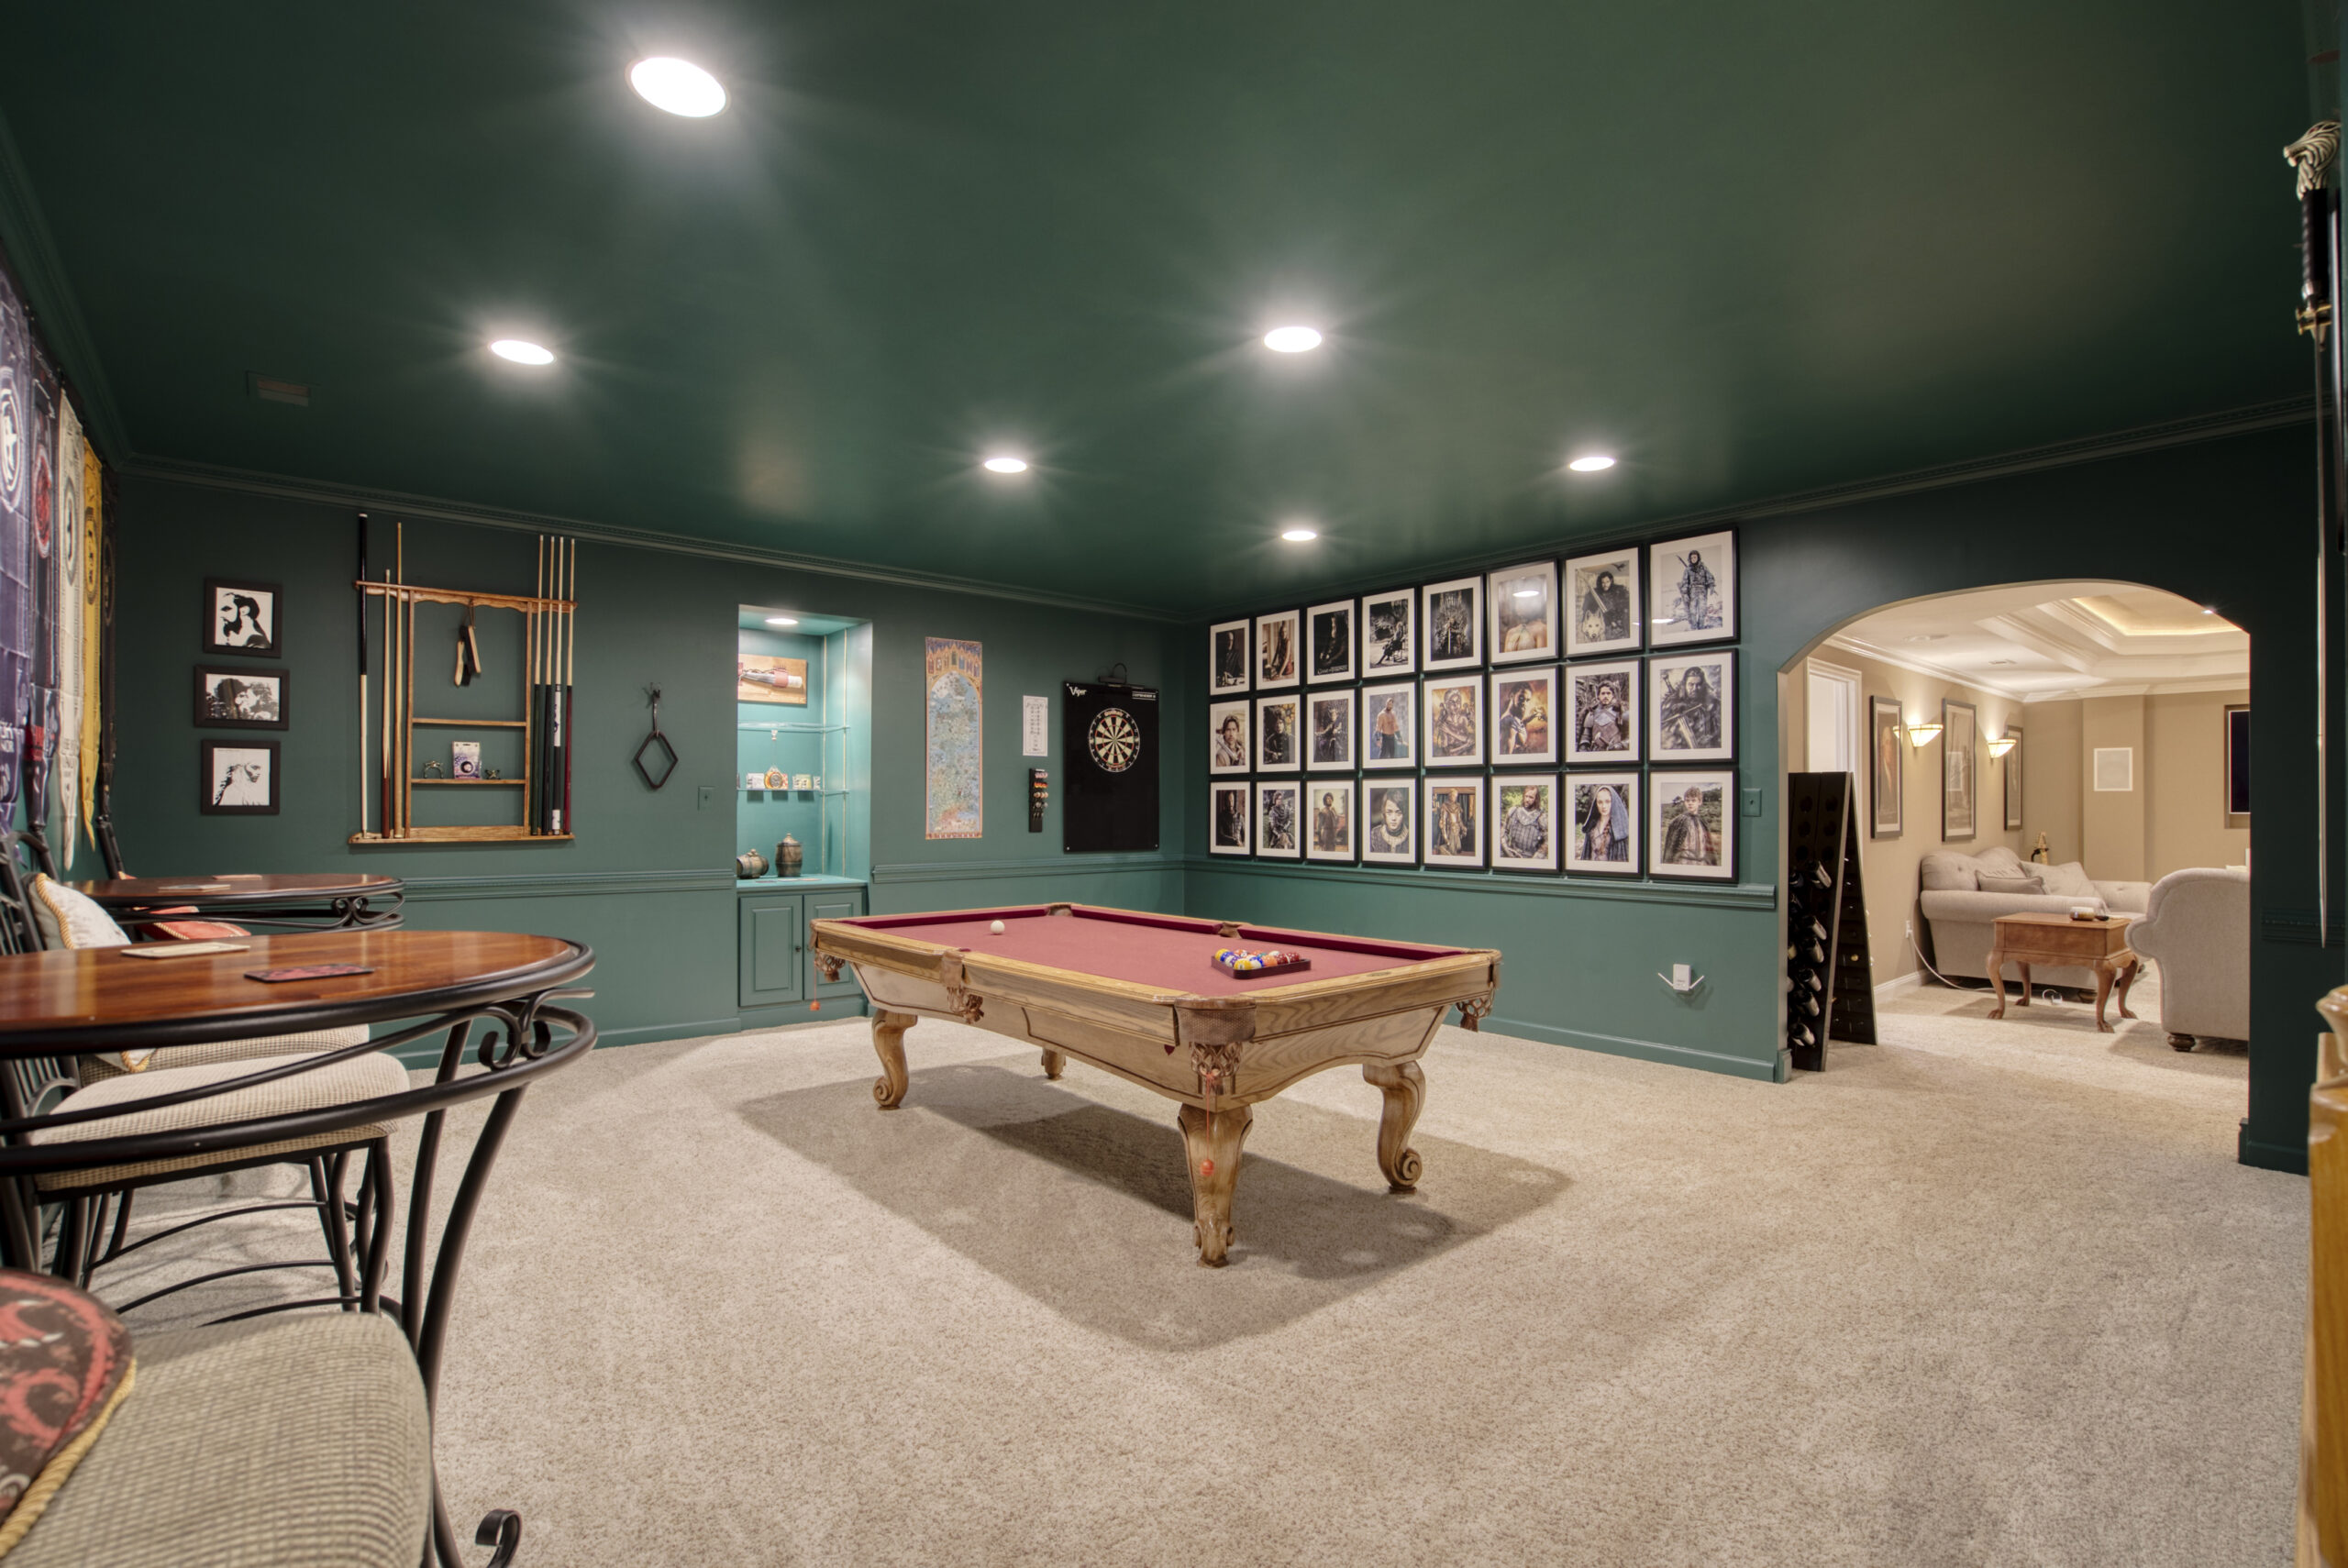 Professional interior photo of 9701 Chilcott Manor Way - showing a billiards room in the basement